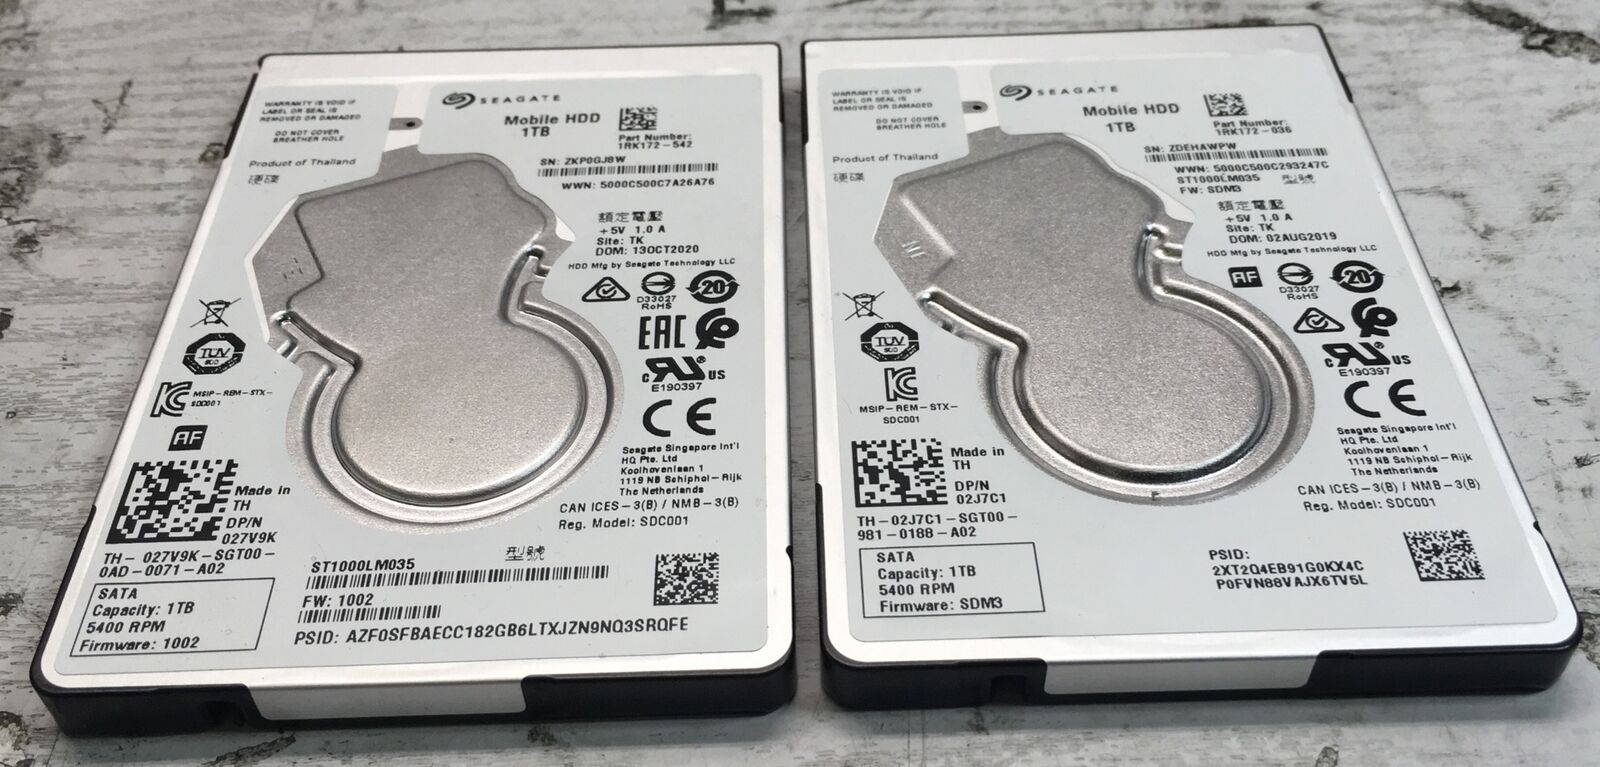 Lot of 2 Seagate ST1000LM035 Mobile HDD 1TB 2.5\